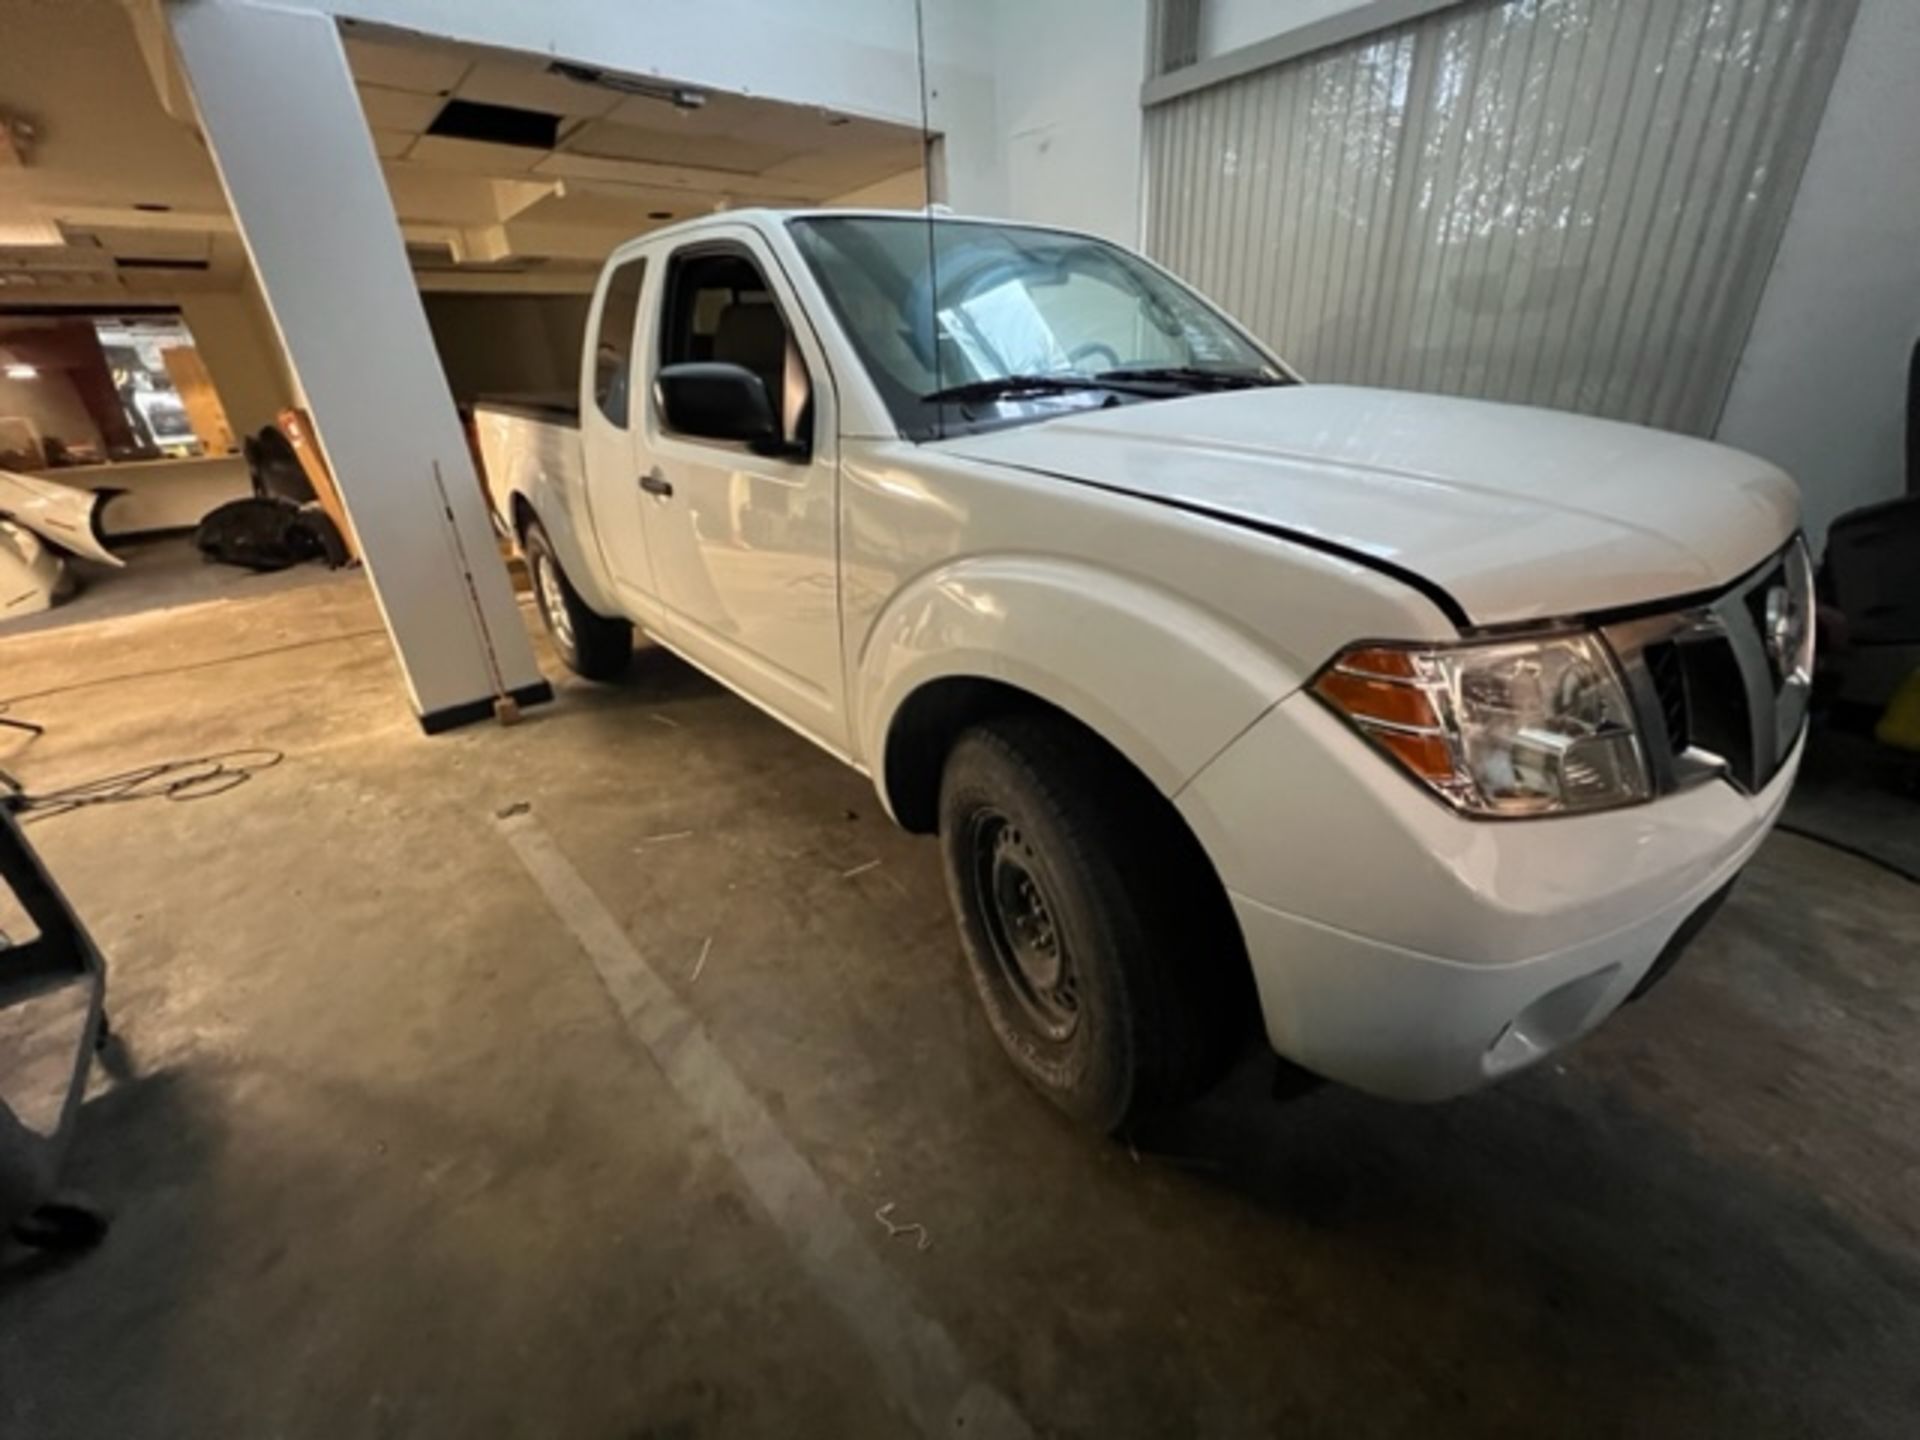 2015 NISSAN FRONTIER PICKUP TRUCK - VIN #1N6AD0CU5FN72560 - WHITE - AUTOMATIC TRANSMISSION - AIR CON - Image 3 of 15